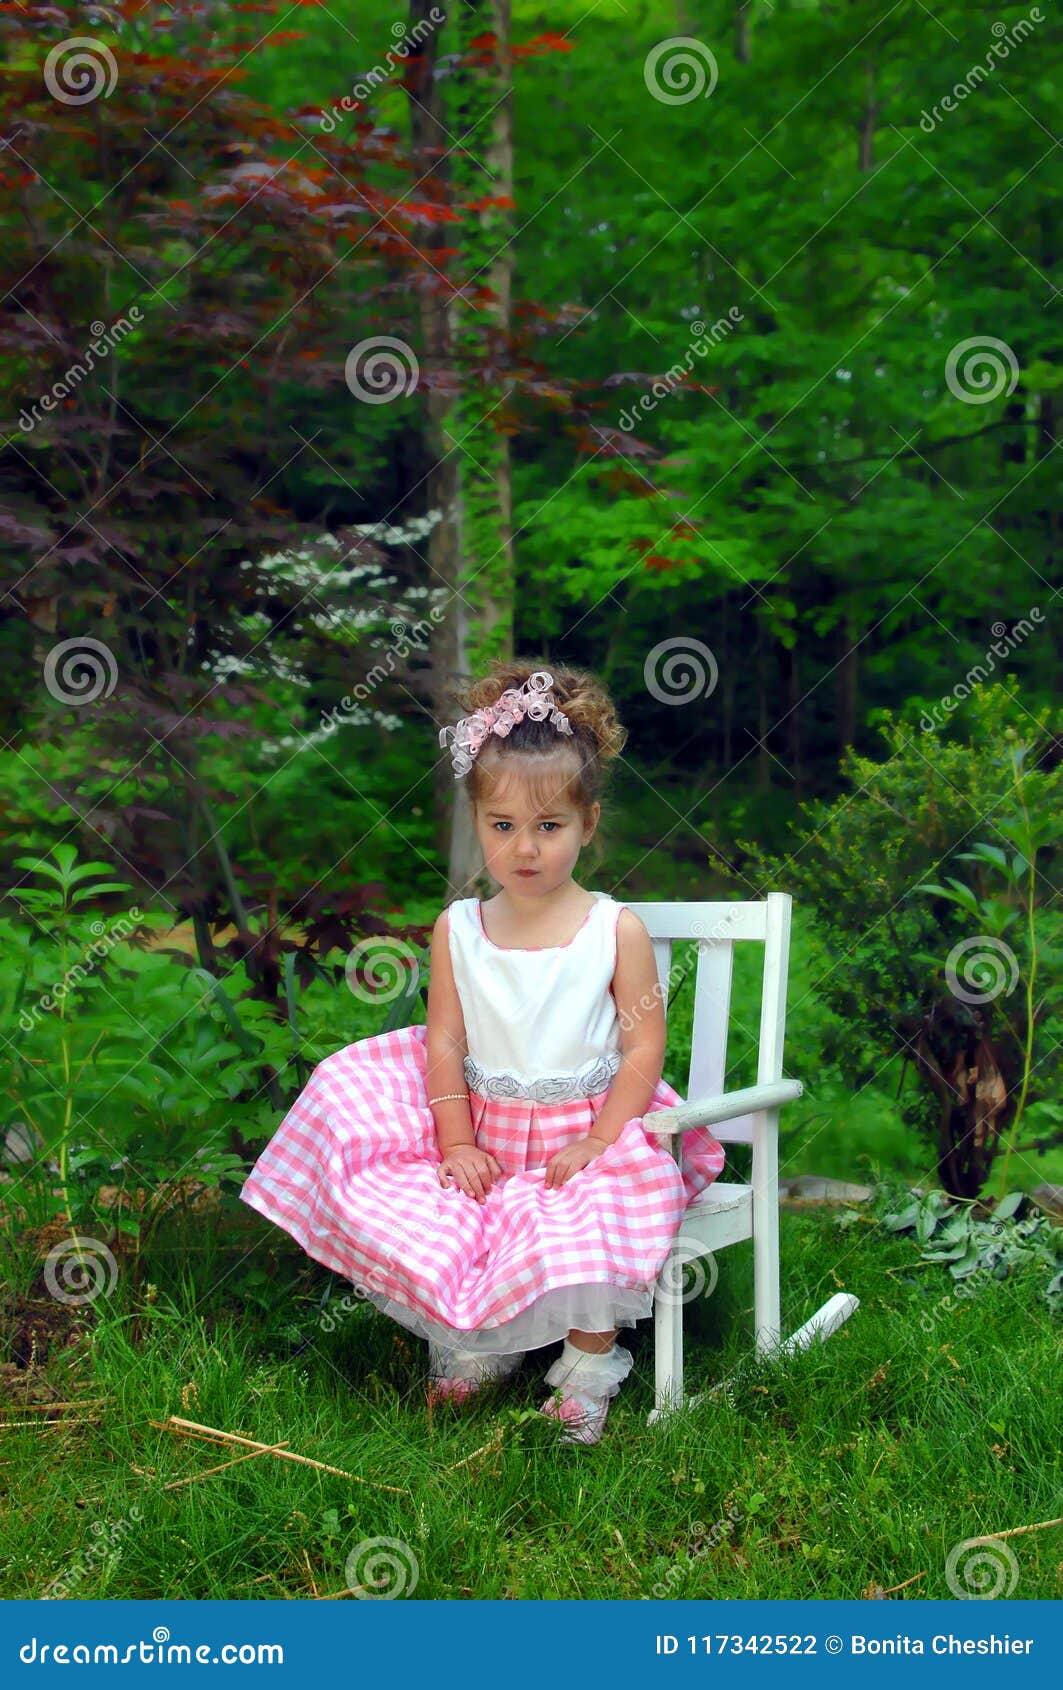 https://thumbs.dreamstime.com/z/little-girl-sits-grimace-her-face-not-feeling-like-giving-sunny-easter-smile-pink-gingham-dress-curly-bow-makes-117342522.jpg